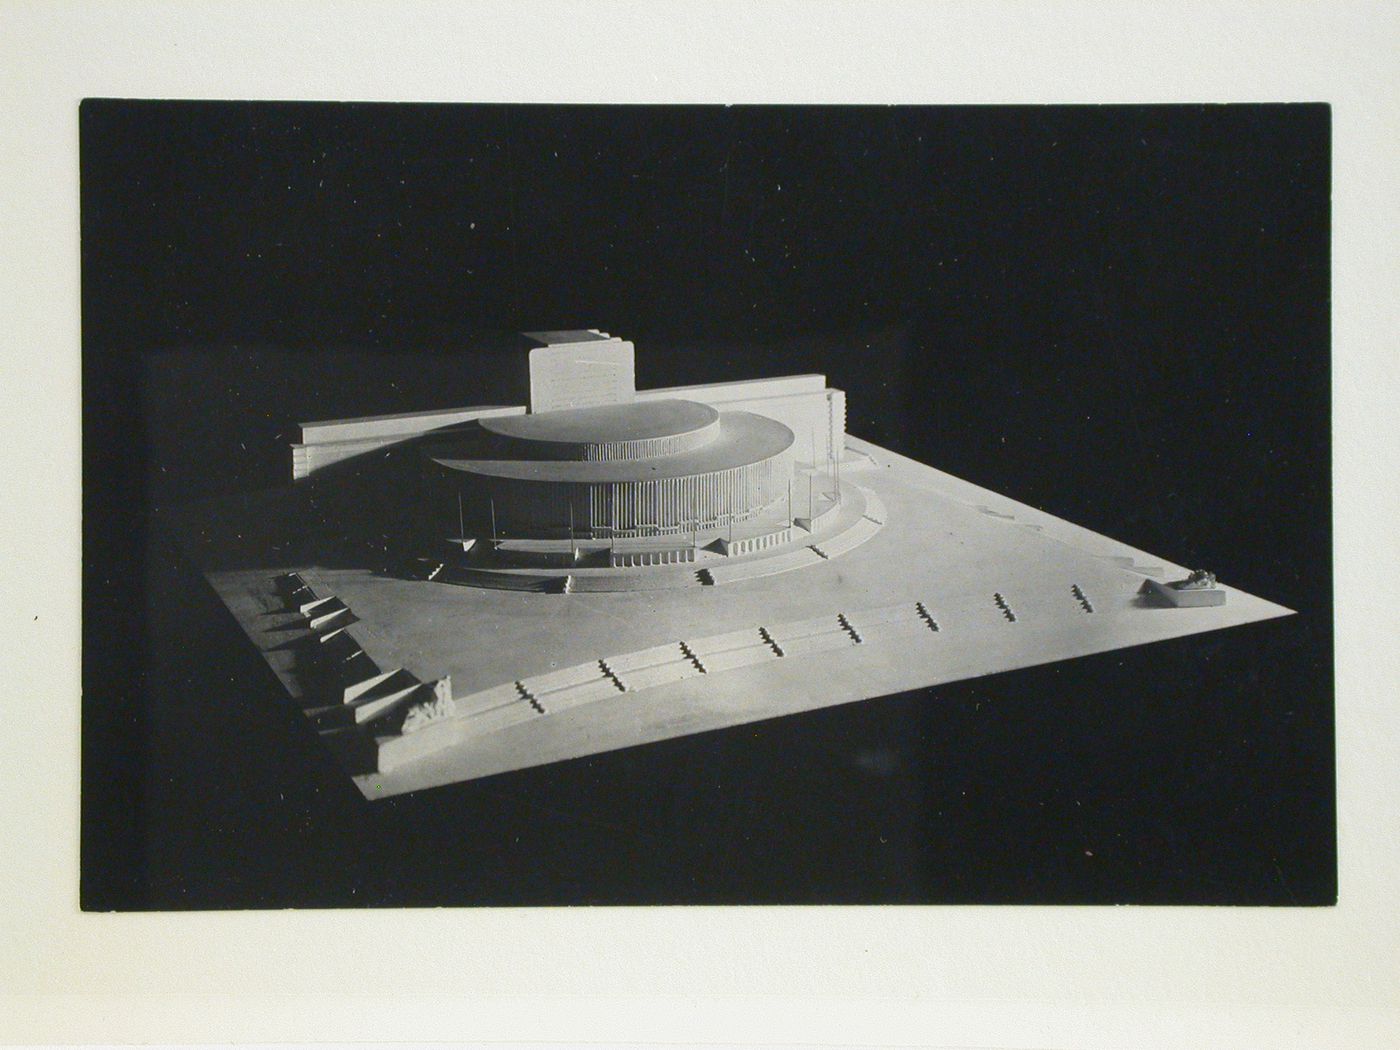 Photograph of a model for the final round of competition for a "synthetic theater" in Sverdlovsk, Soviet Union (now Ekaterinburg, Russia)